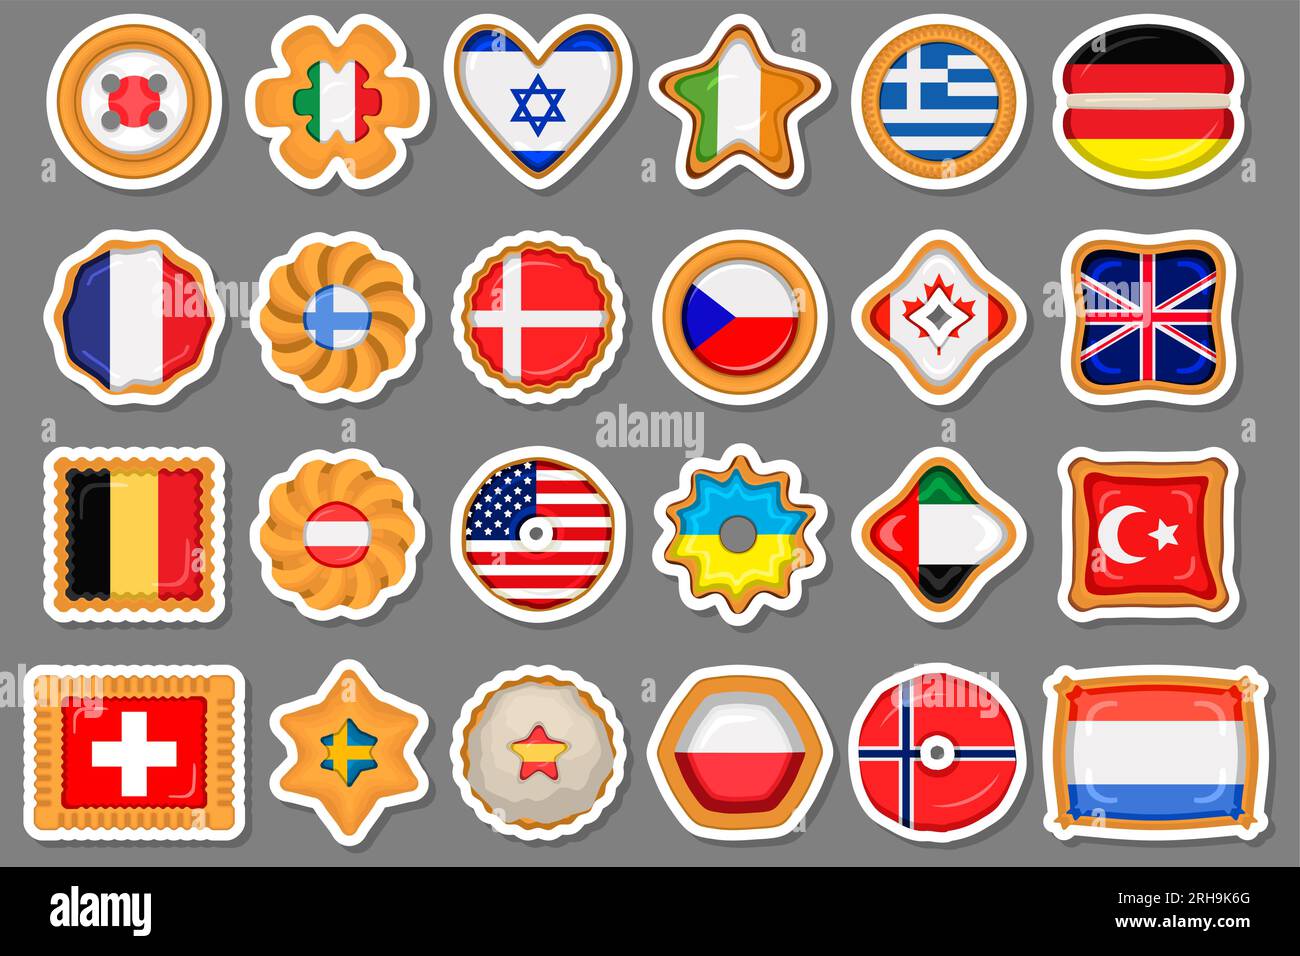 All Country Flags of the World